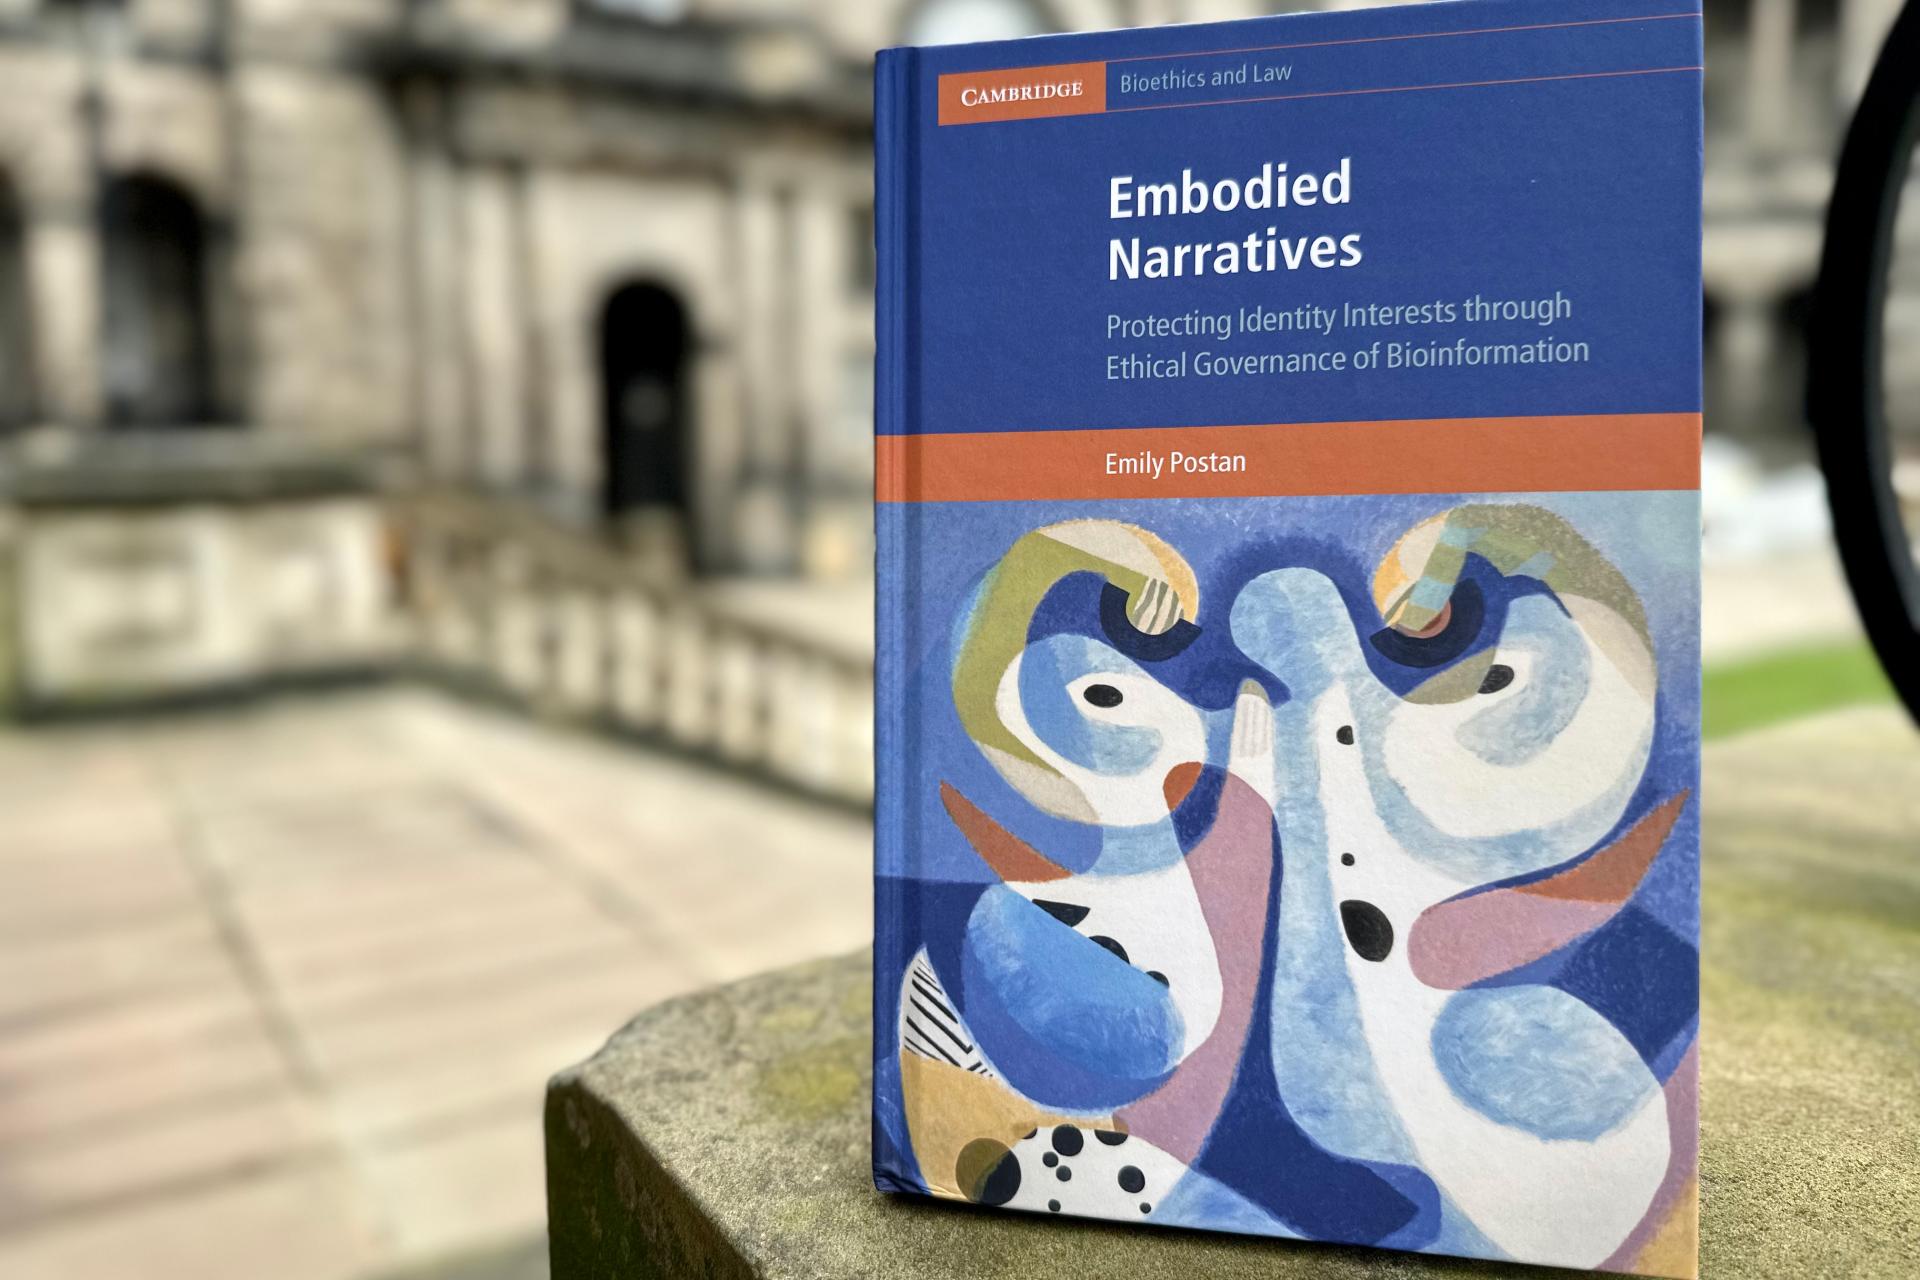 Emily Postan's book in the Old College Quad